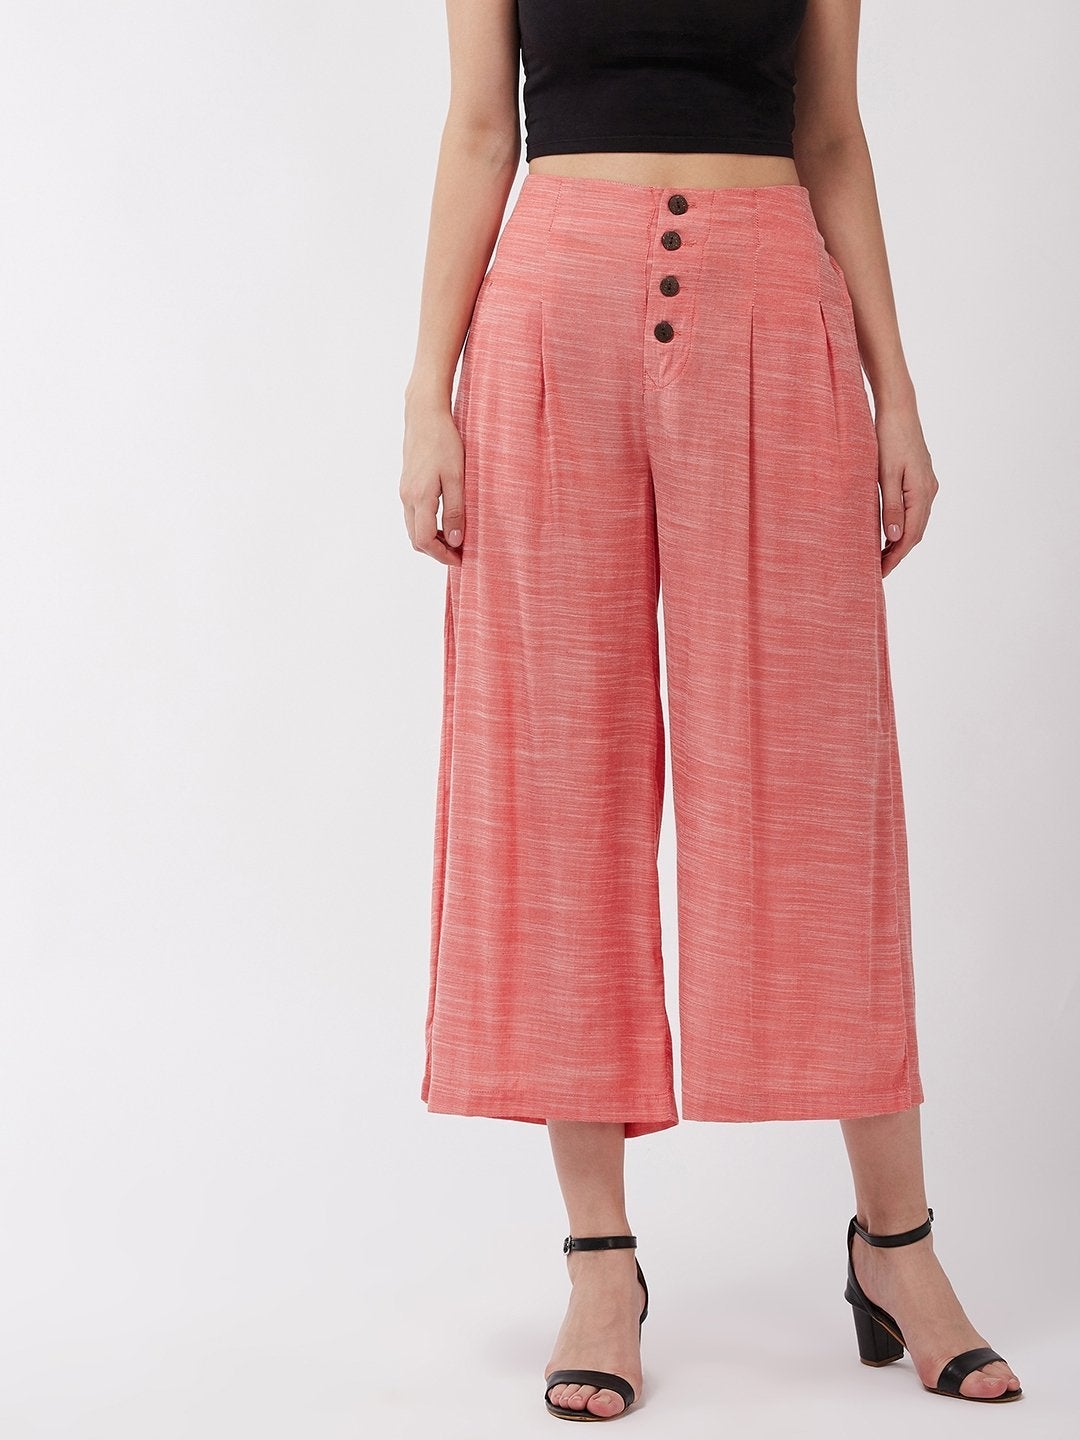 Women's Rouge Pink Culottes - InWeave